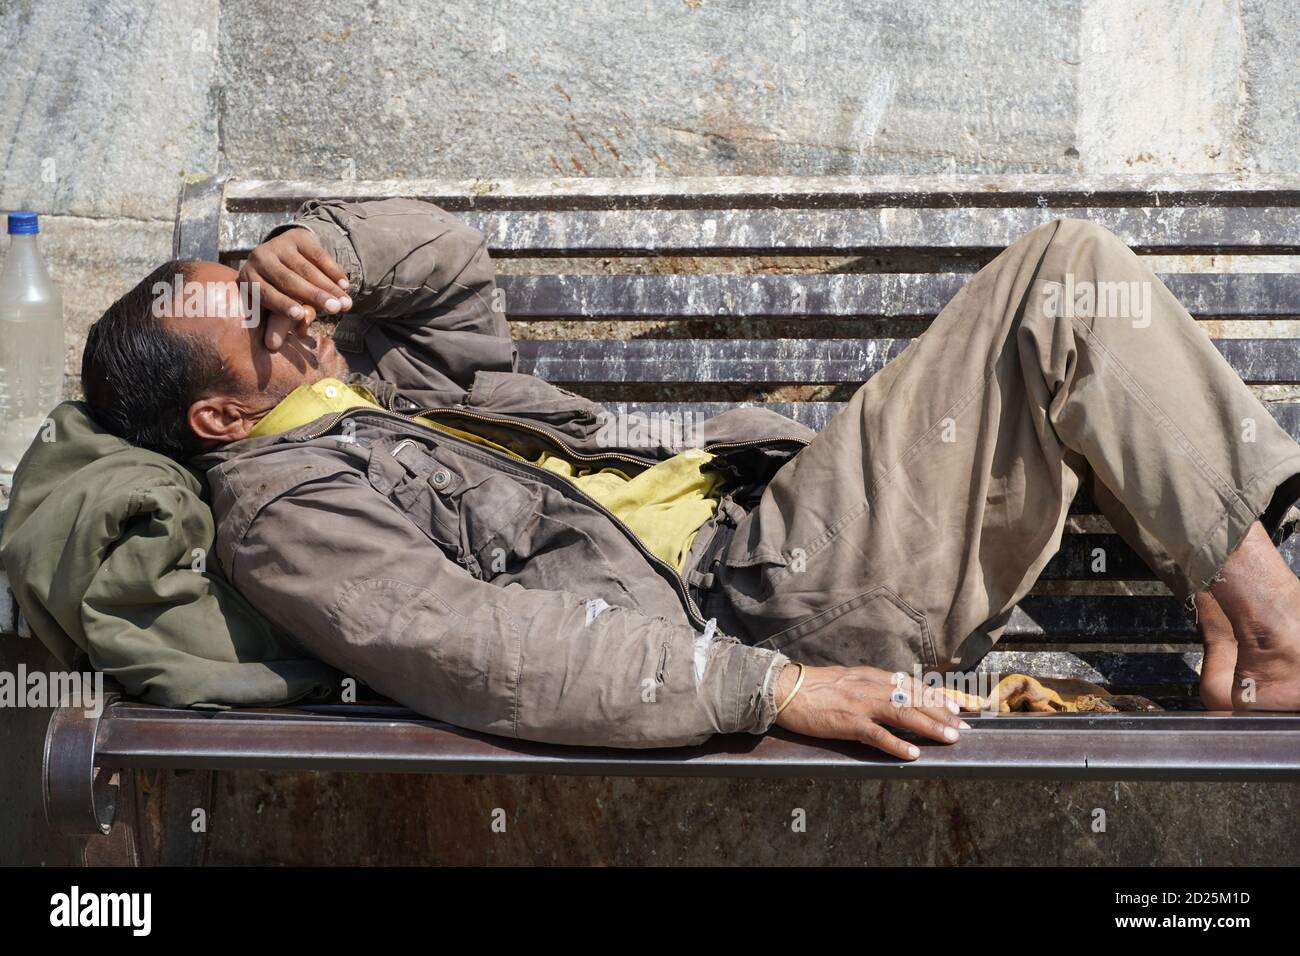 Poor homeless beggar man or refugee sleeping on a dirty wooden bench in a one-way street in the city during day time. Social documentary concept. Shoe Stock Photo